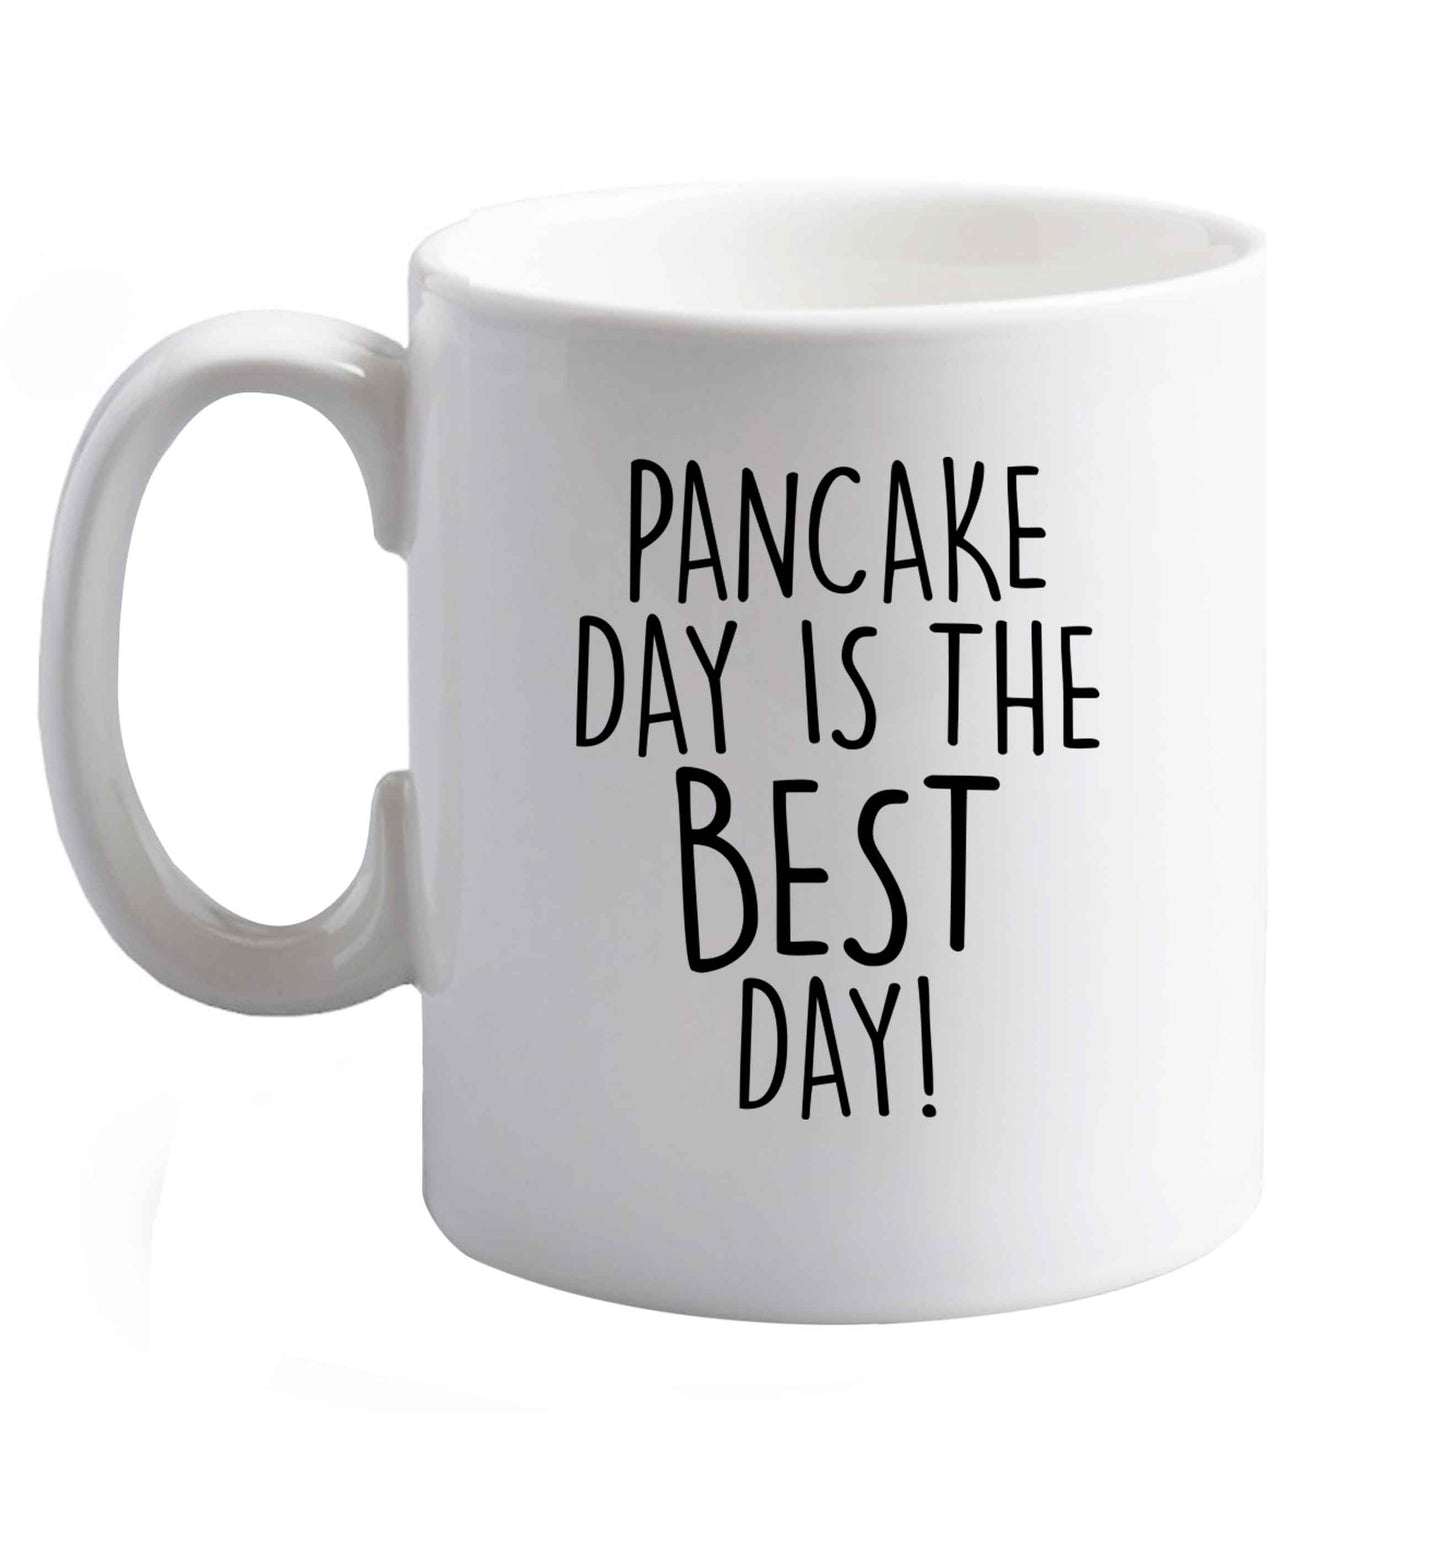 10 oz Pancake Day is the Best Day ceramic mug right handed